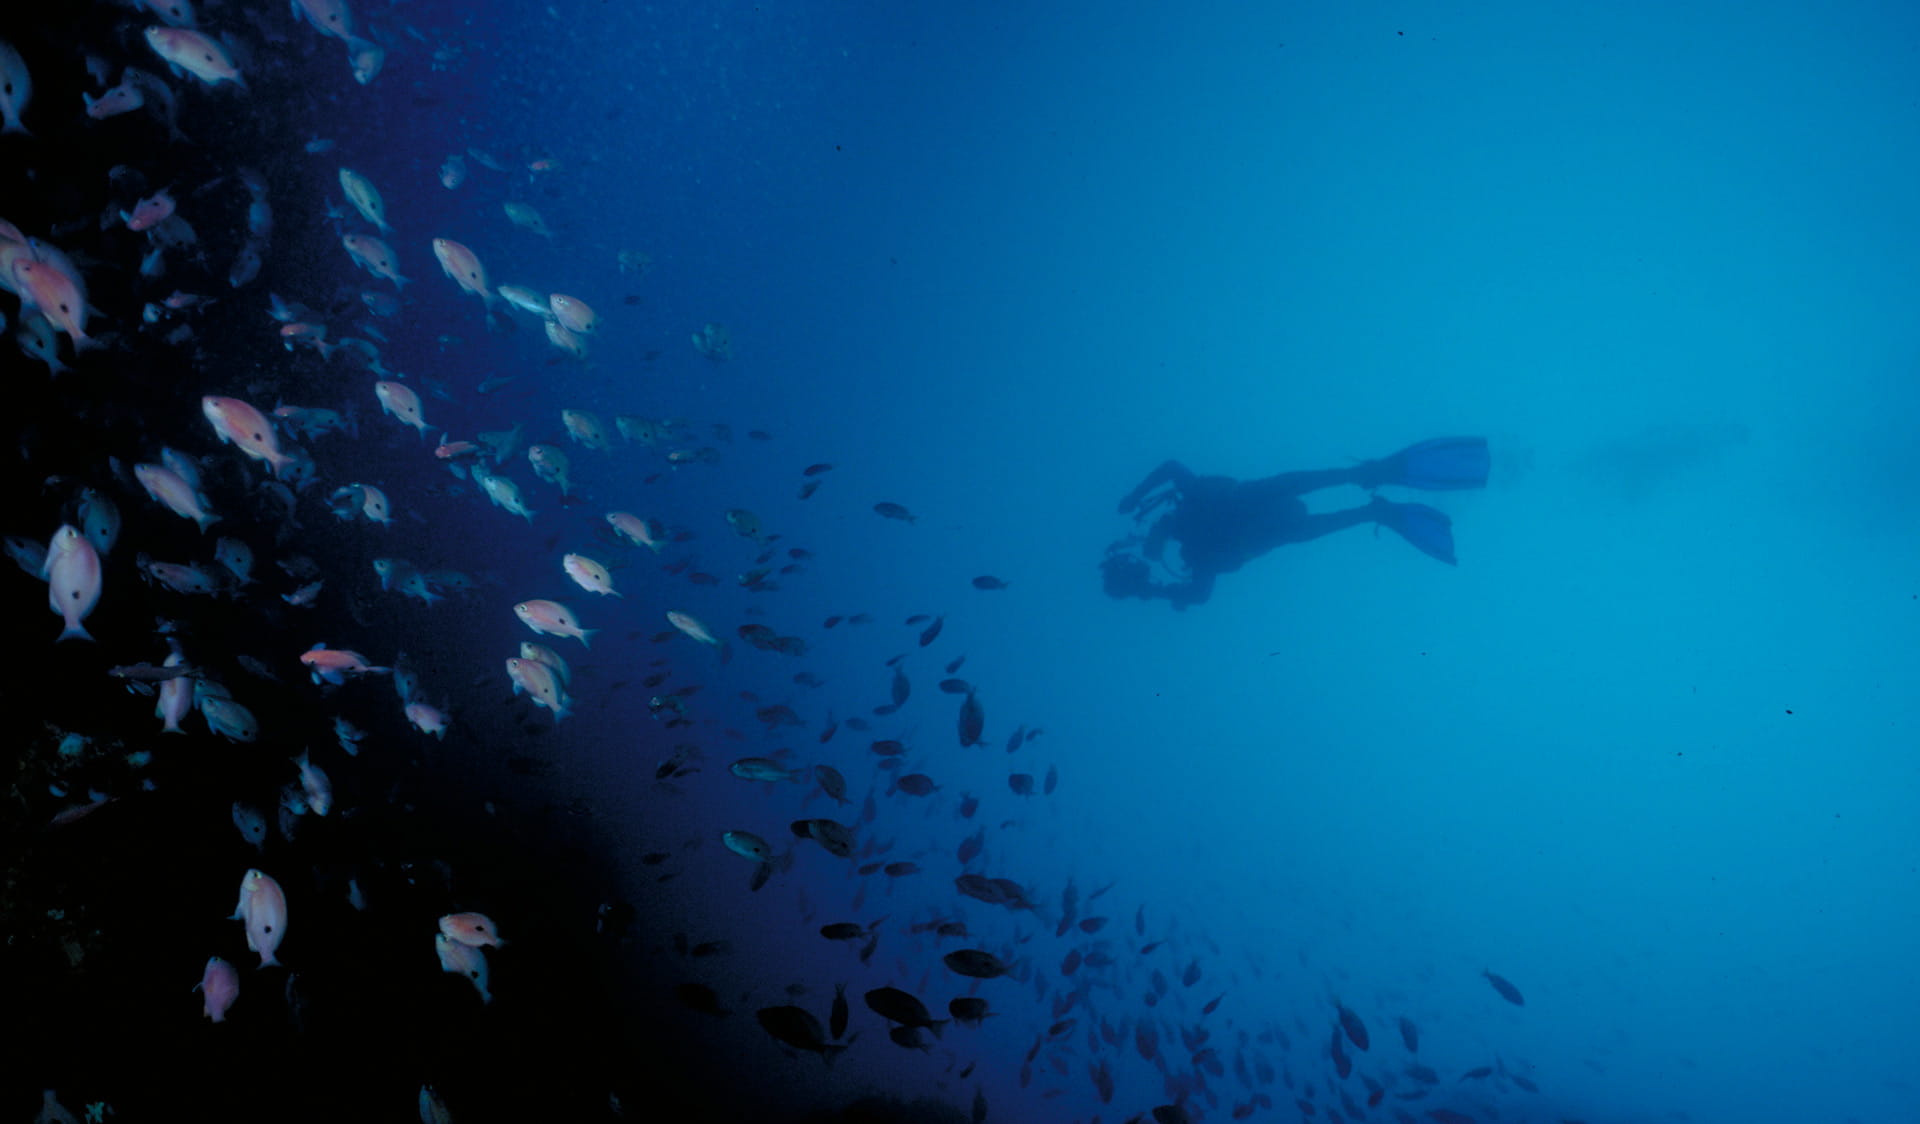 A diver takes a photo a school of fish in the Wilsons Promontory Marine National Park.